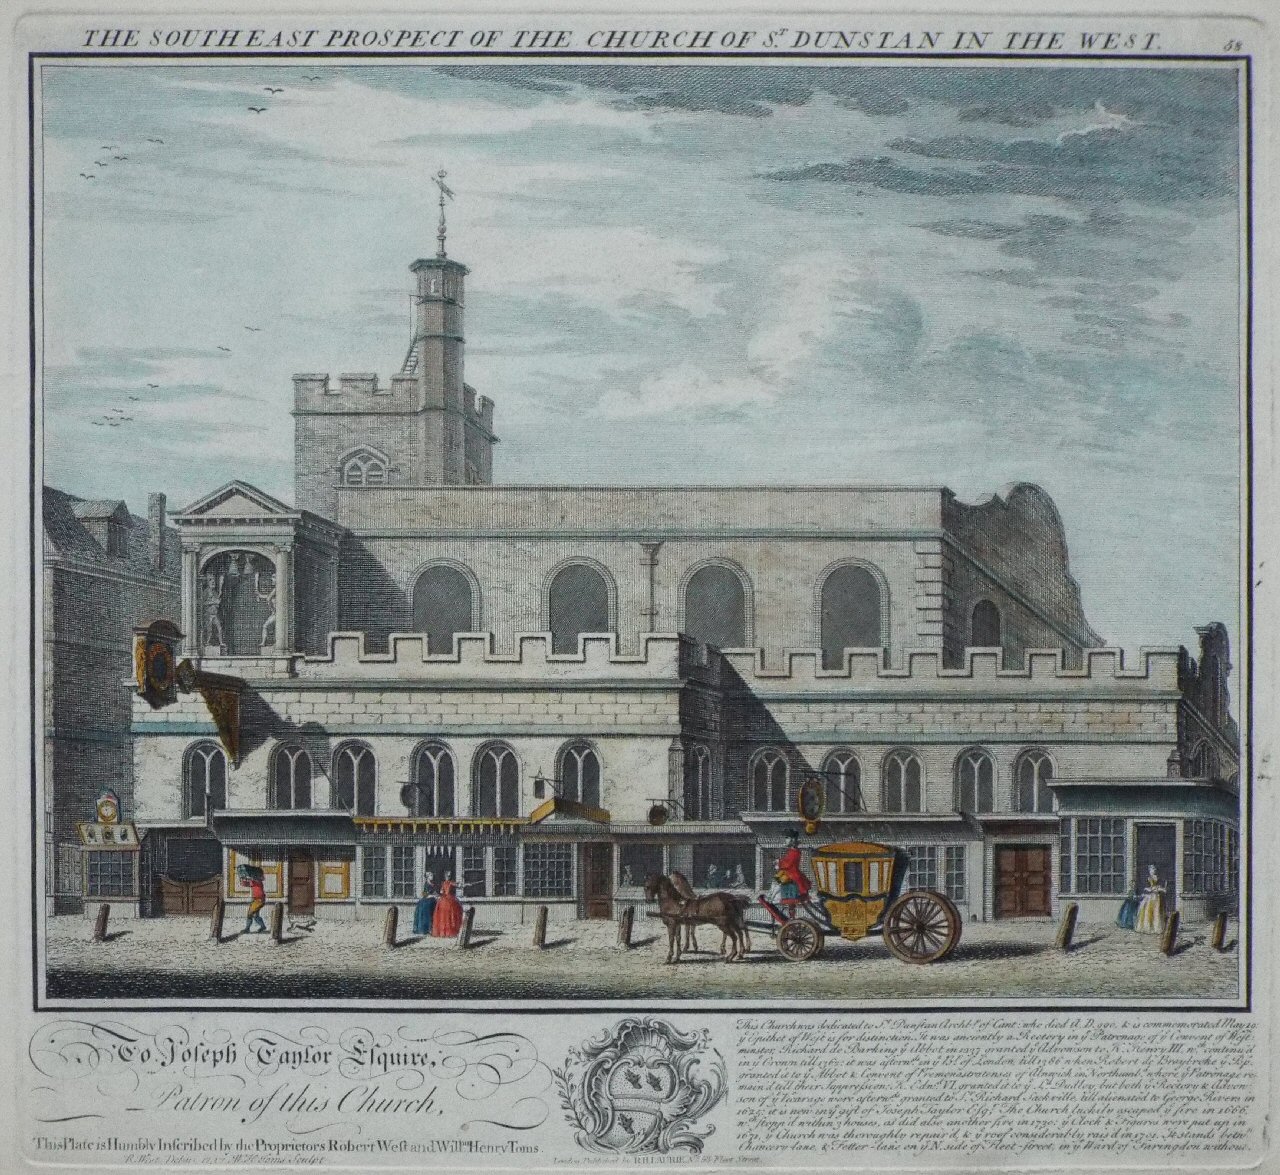 Print - The South East Prospect of the Church of St.Dunstan in the West - Toms